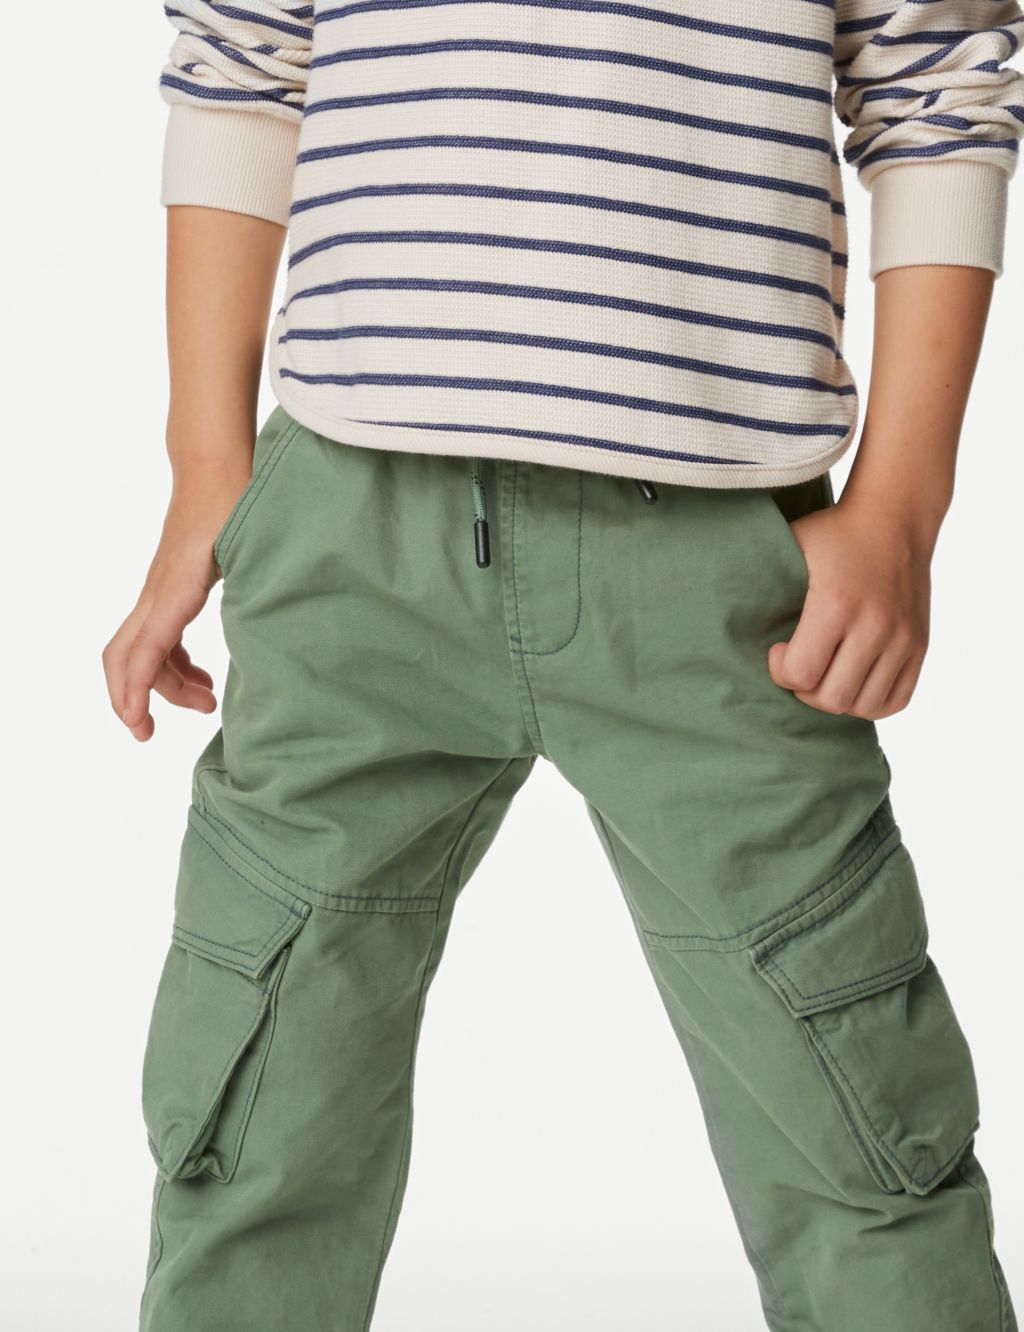 Page 11 - Boys' Clothes | M&S